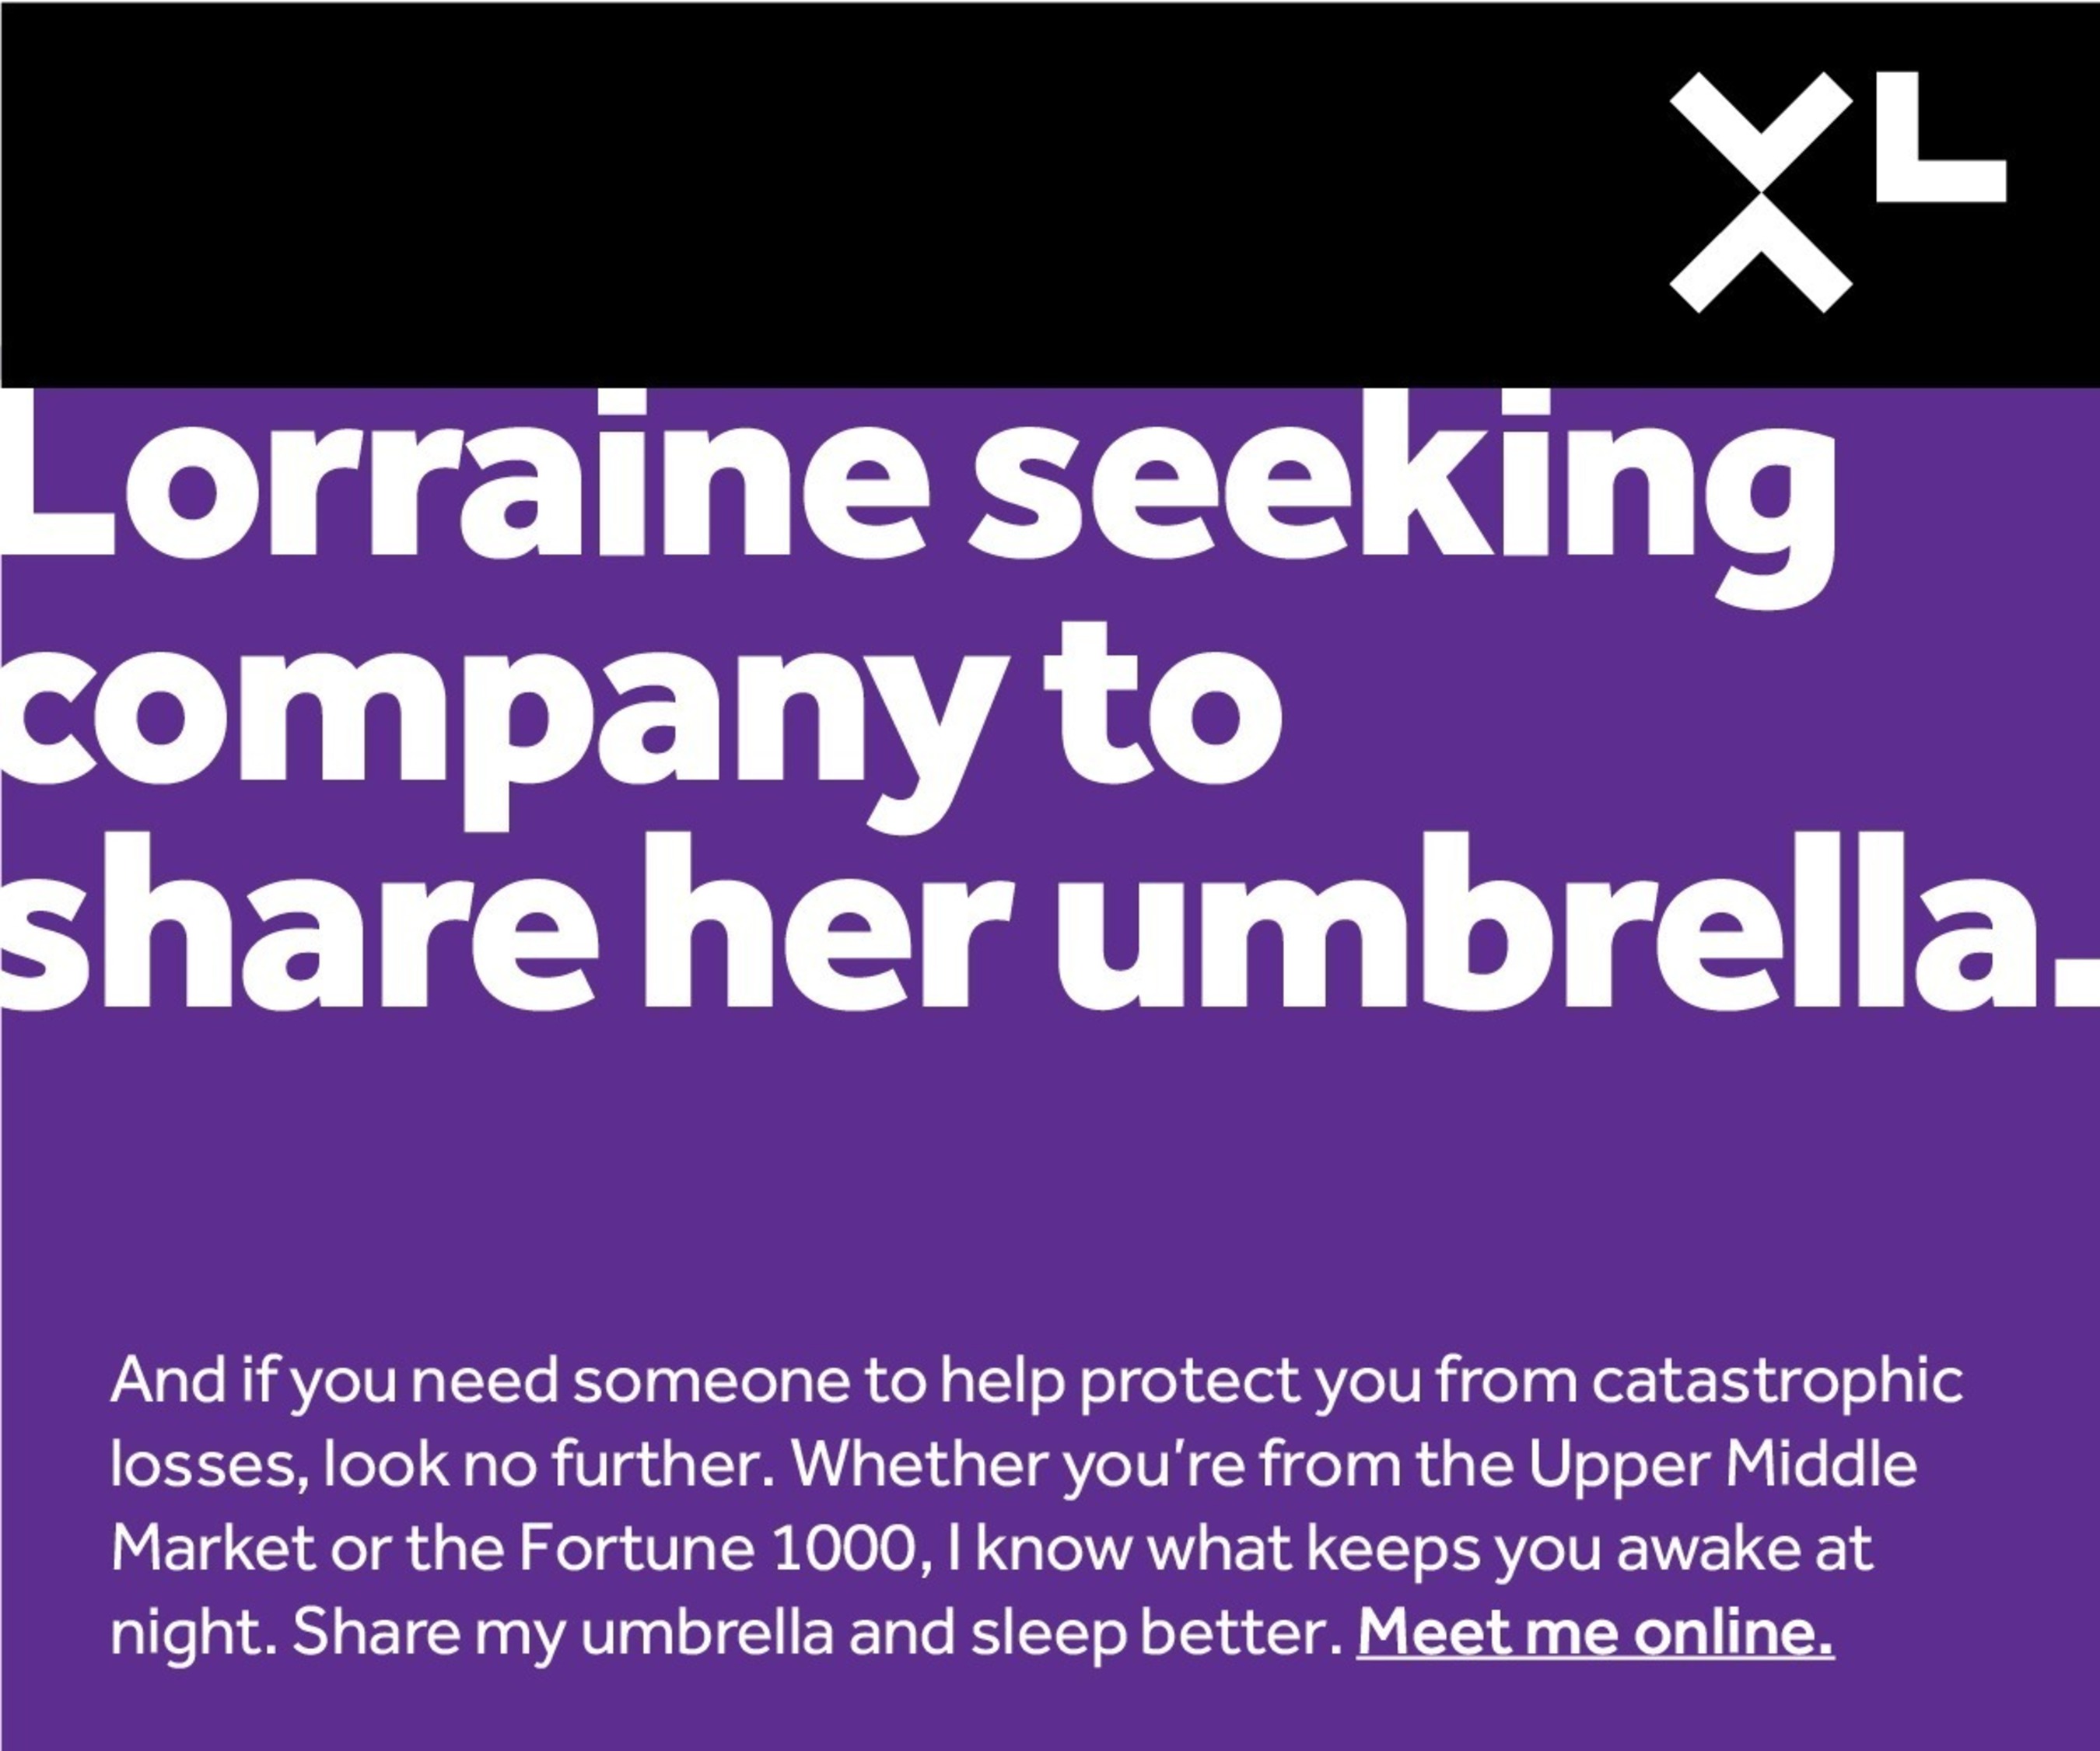 XL Group, a global insurance company that manages business' complex risks, is getting “personal” with new ad campaign. The ads feature XL’s own underwriters and risk engineers and highlight the company’s business appetite and broad range of commercial products and services. (PRNewsFoto/XL Group)